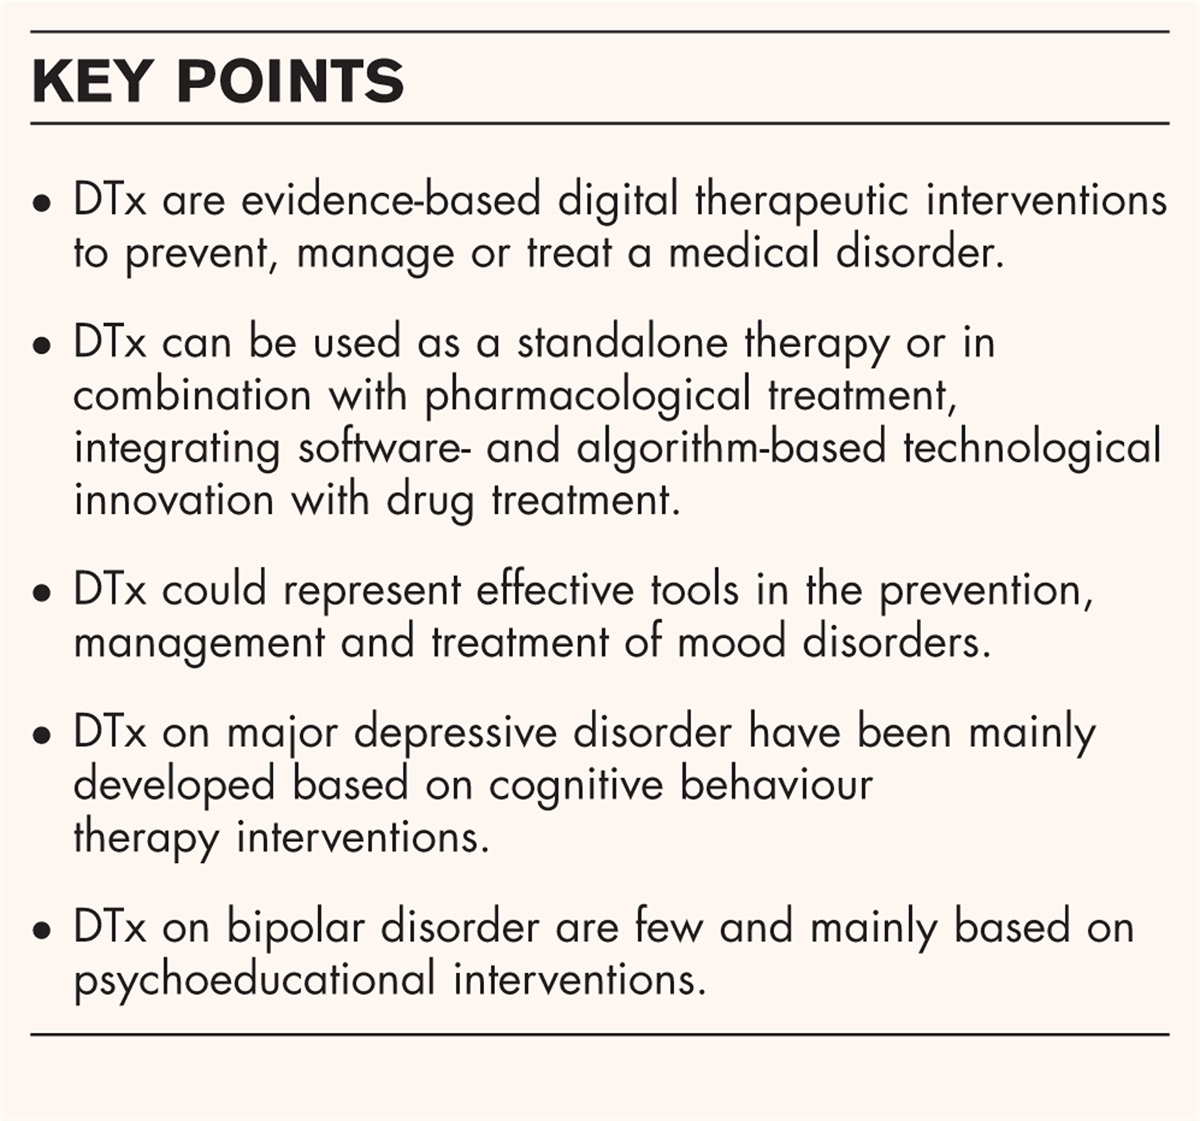 Practical application of digital therapeutics in people with mood disorders